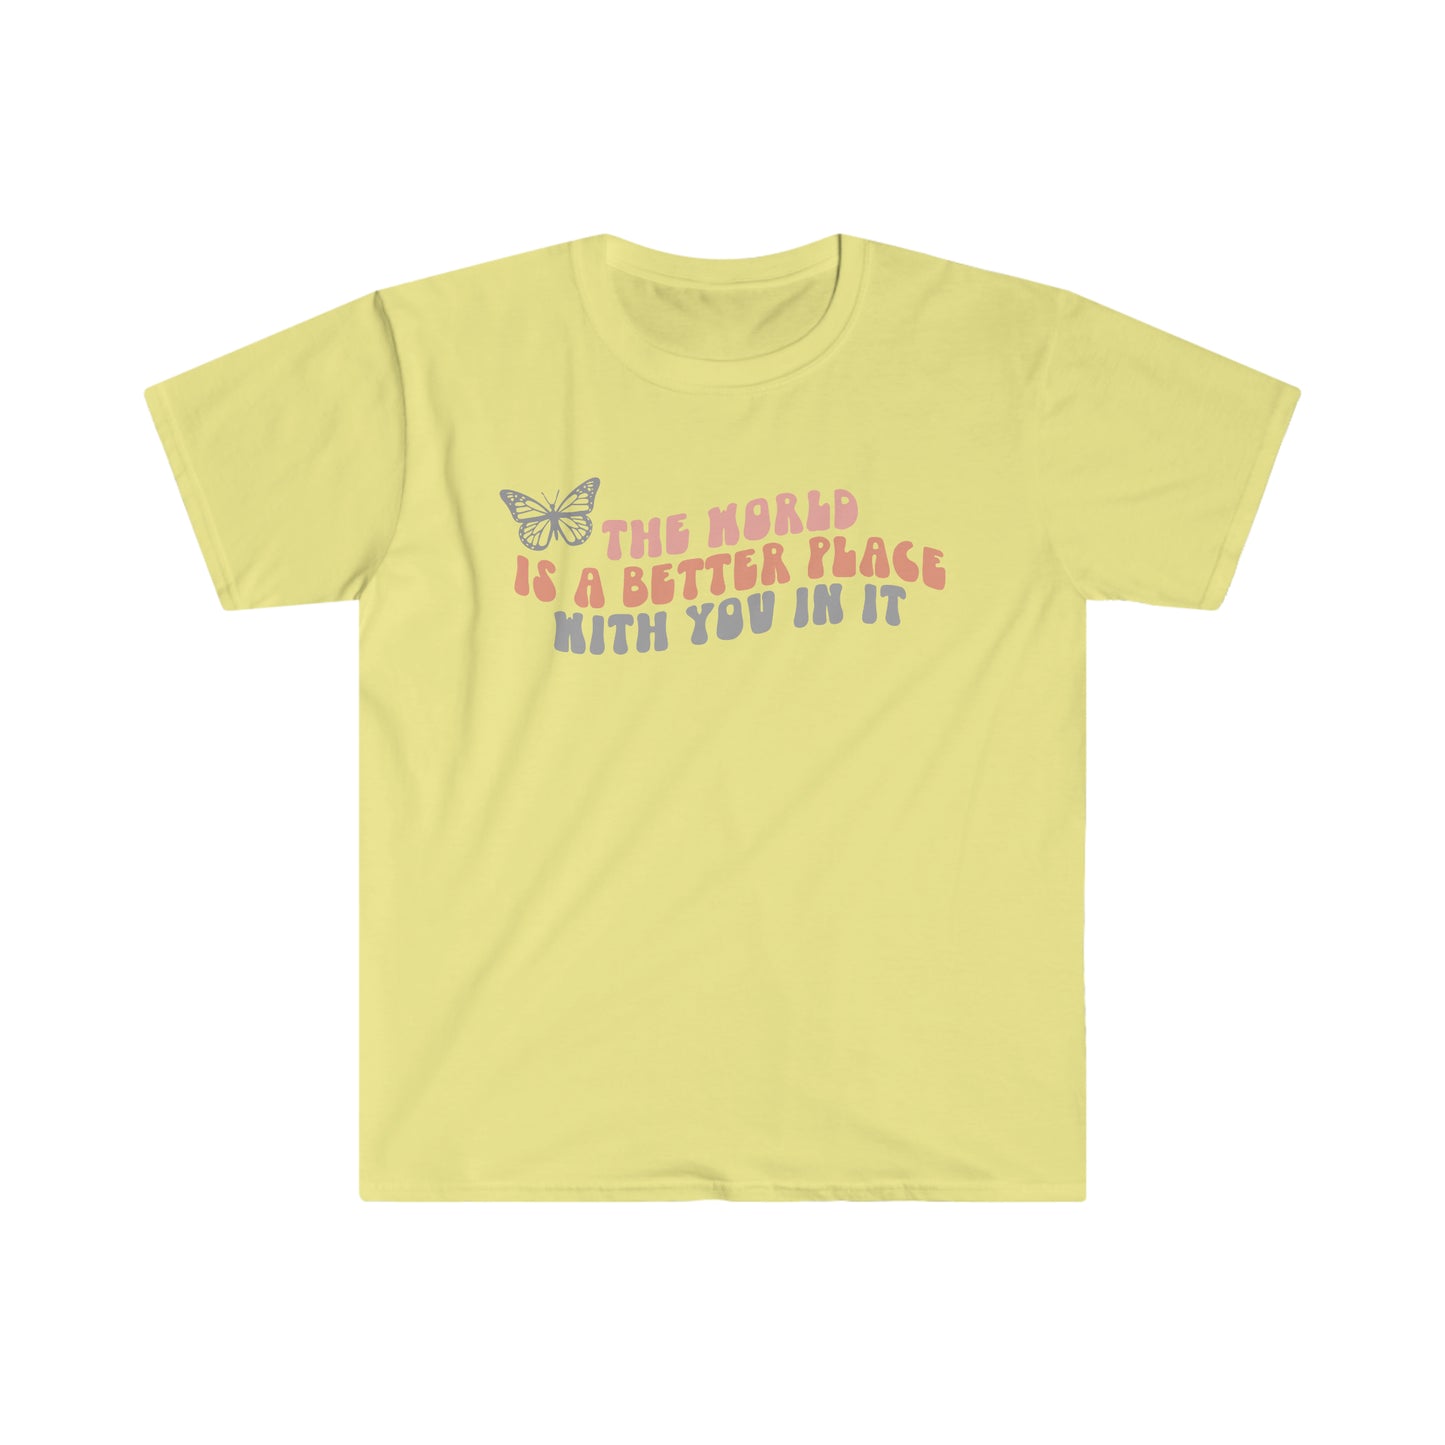 The world is a better place with you in it - Unisex Softstyle T-Shirt